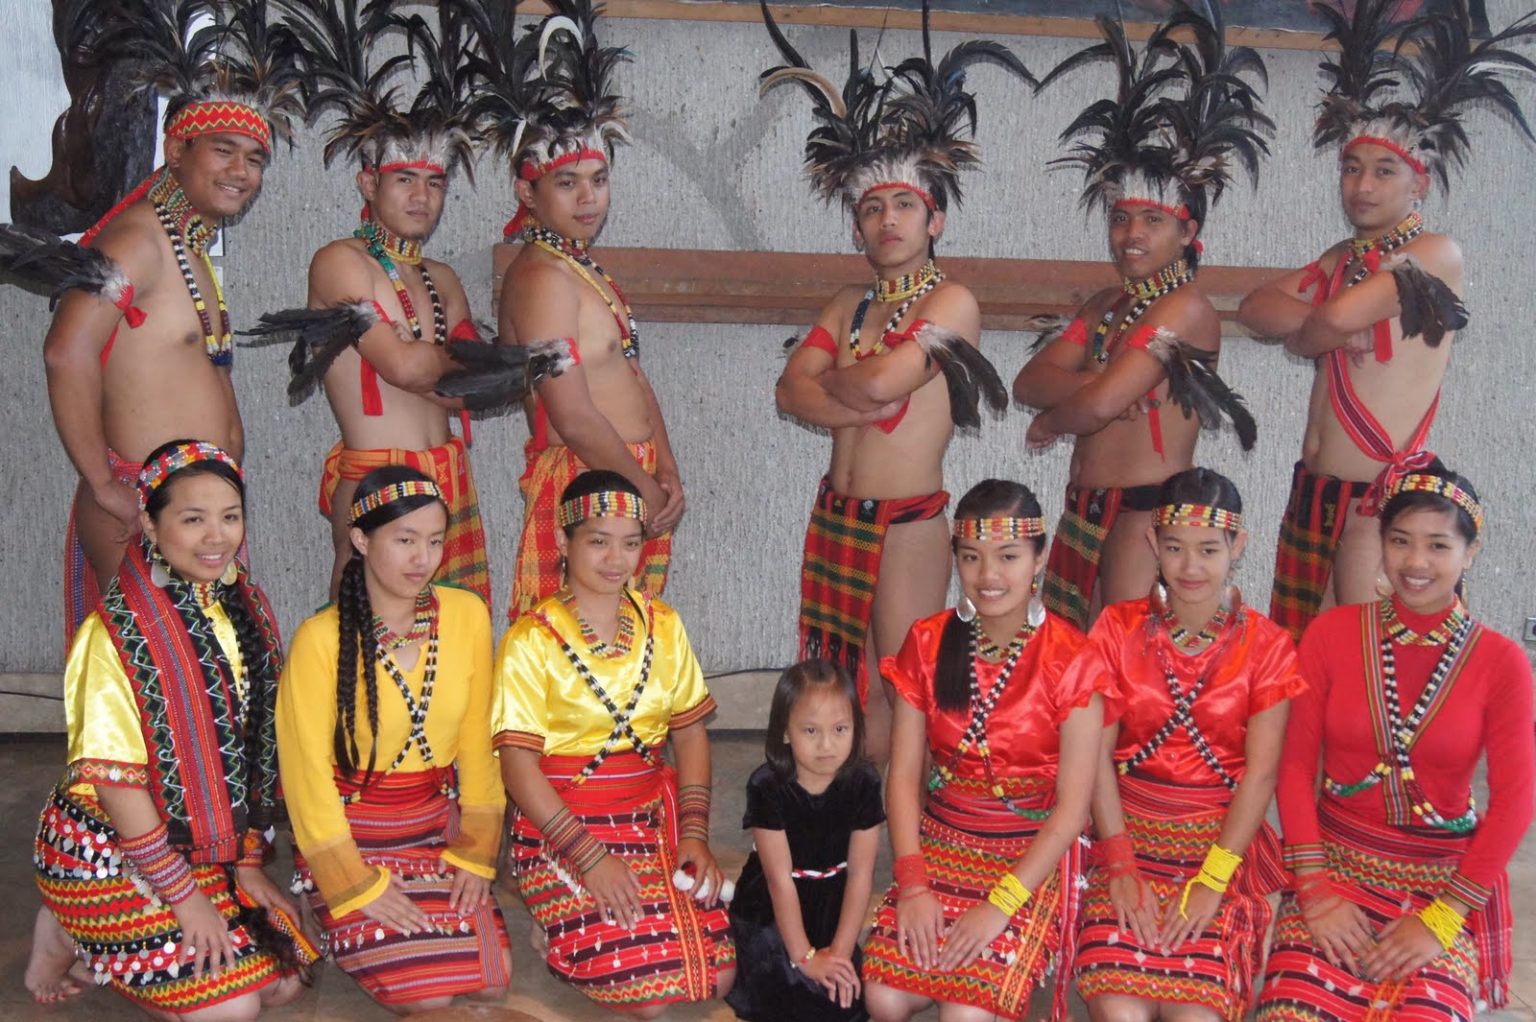 Some traditional clothes indigenous people in PH wear | Cebu Daily News